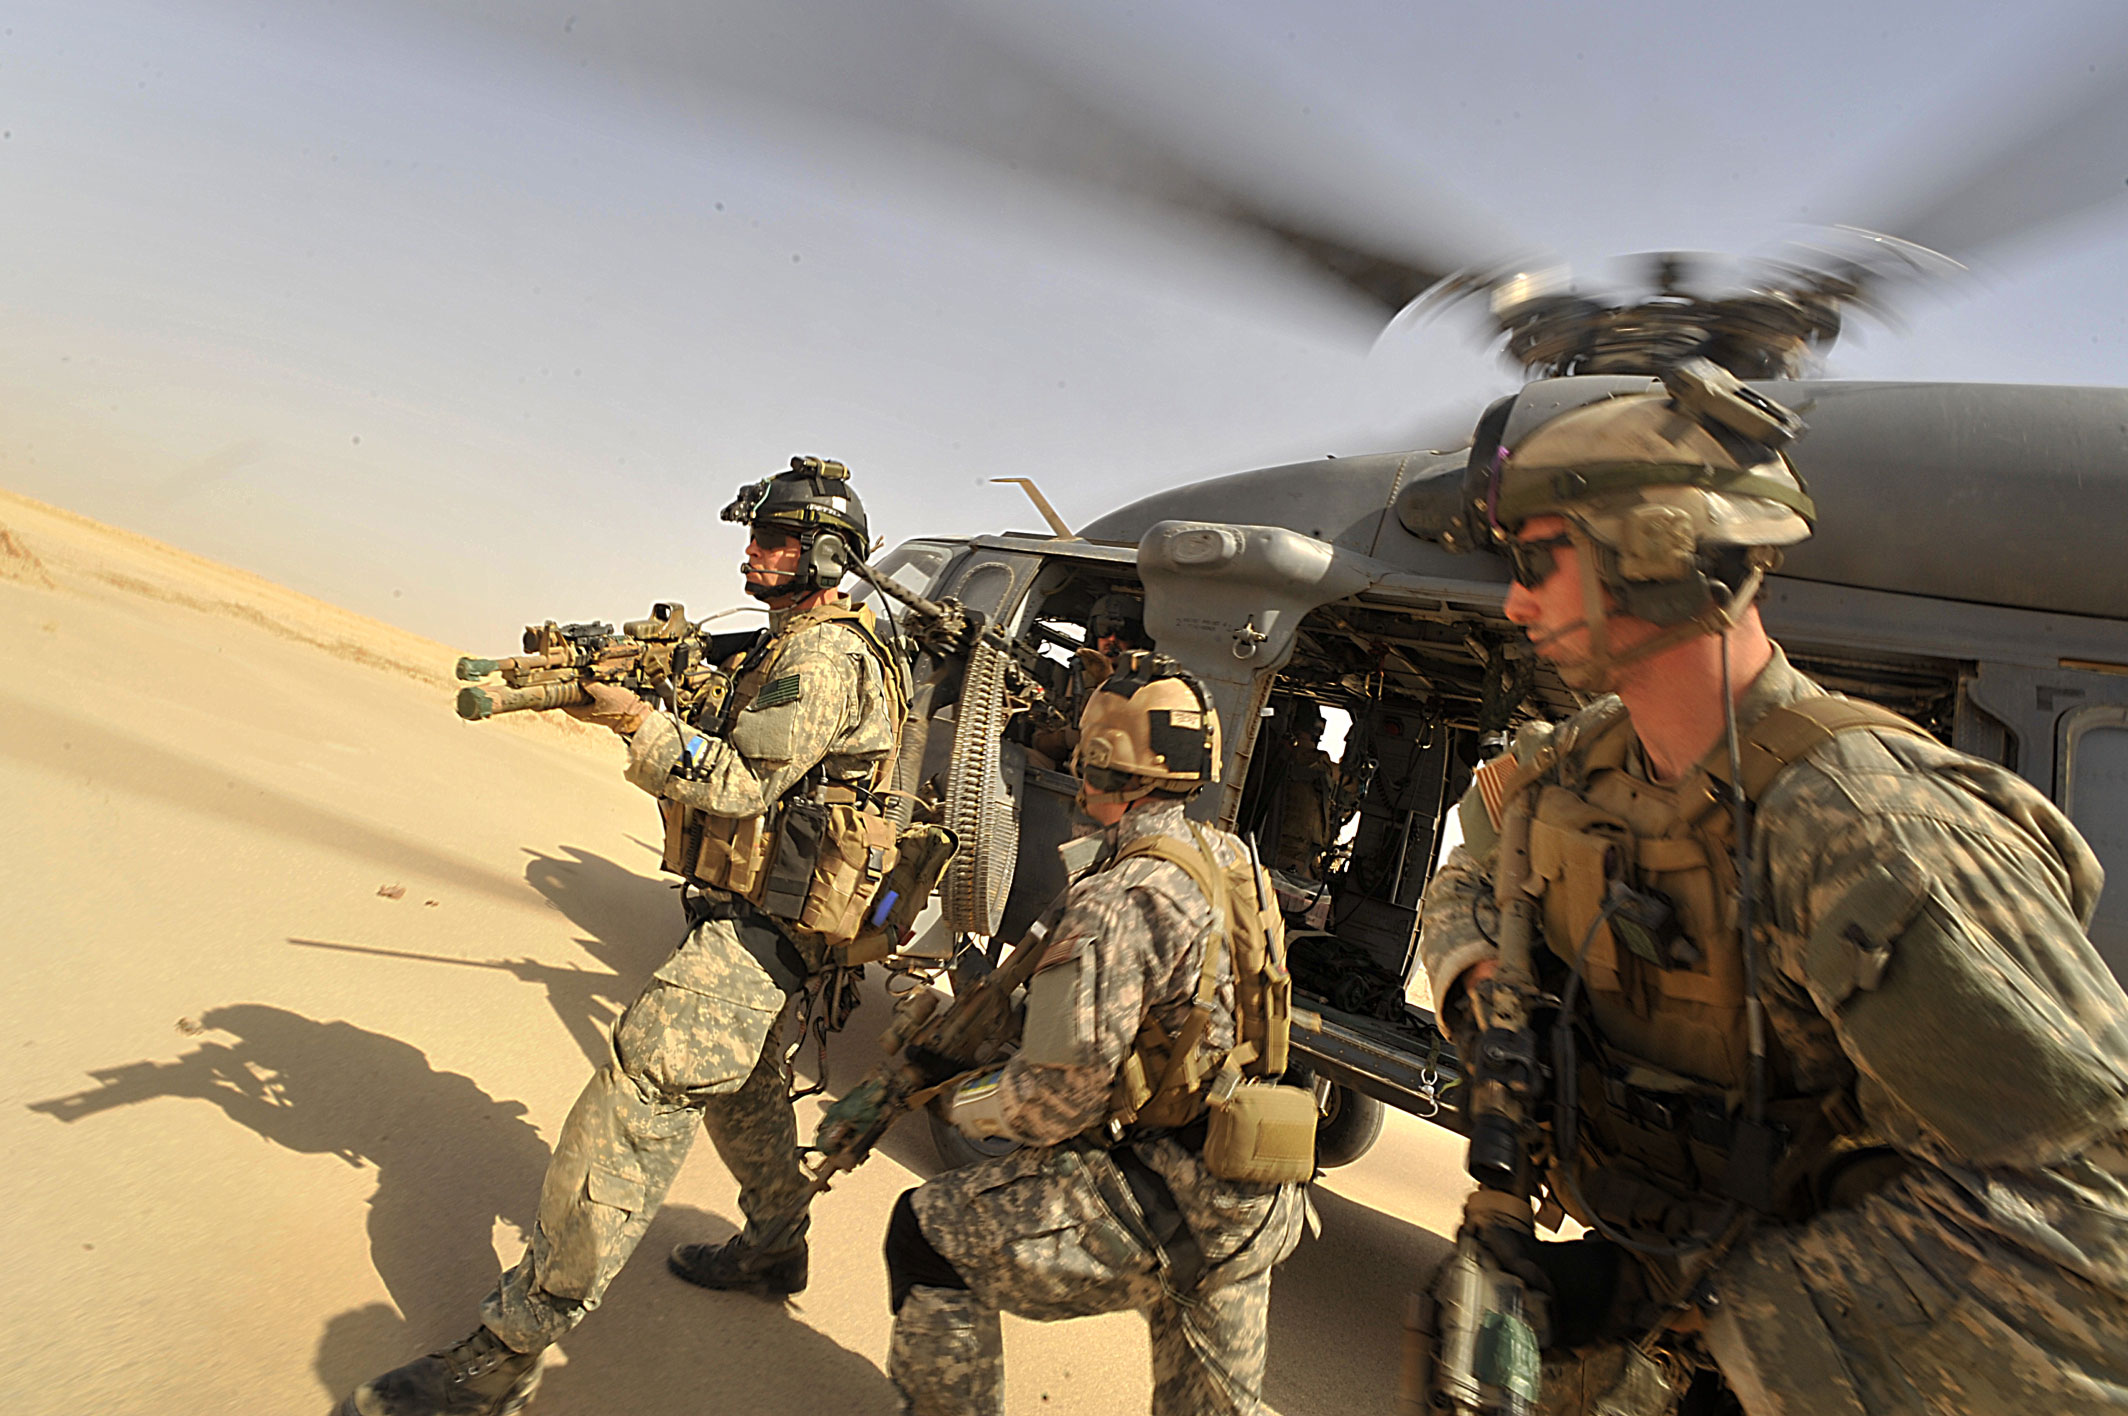 2128x1416 > Air Force Pararescue Wallpapers